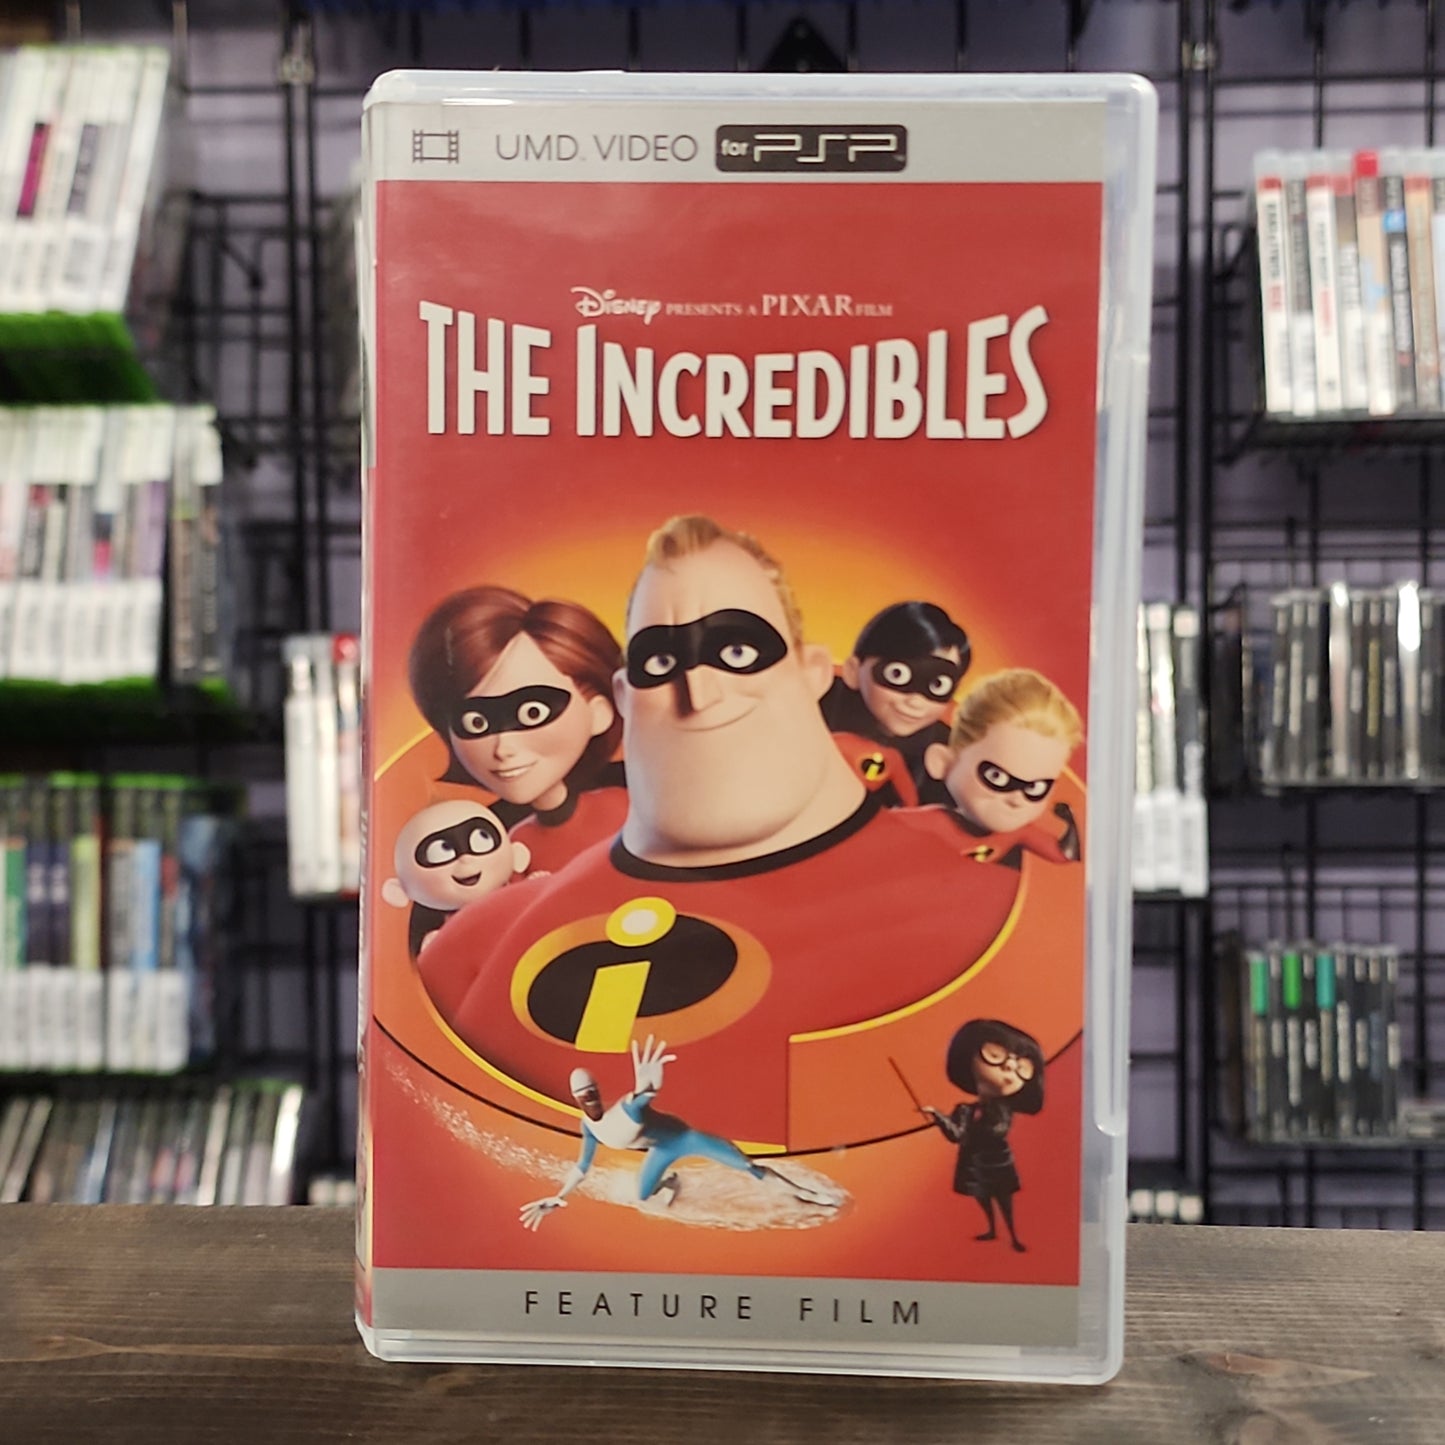 PSP - The Incredibles [UMD Video]